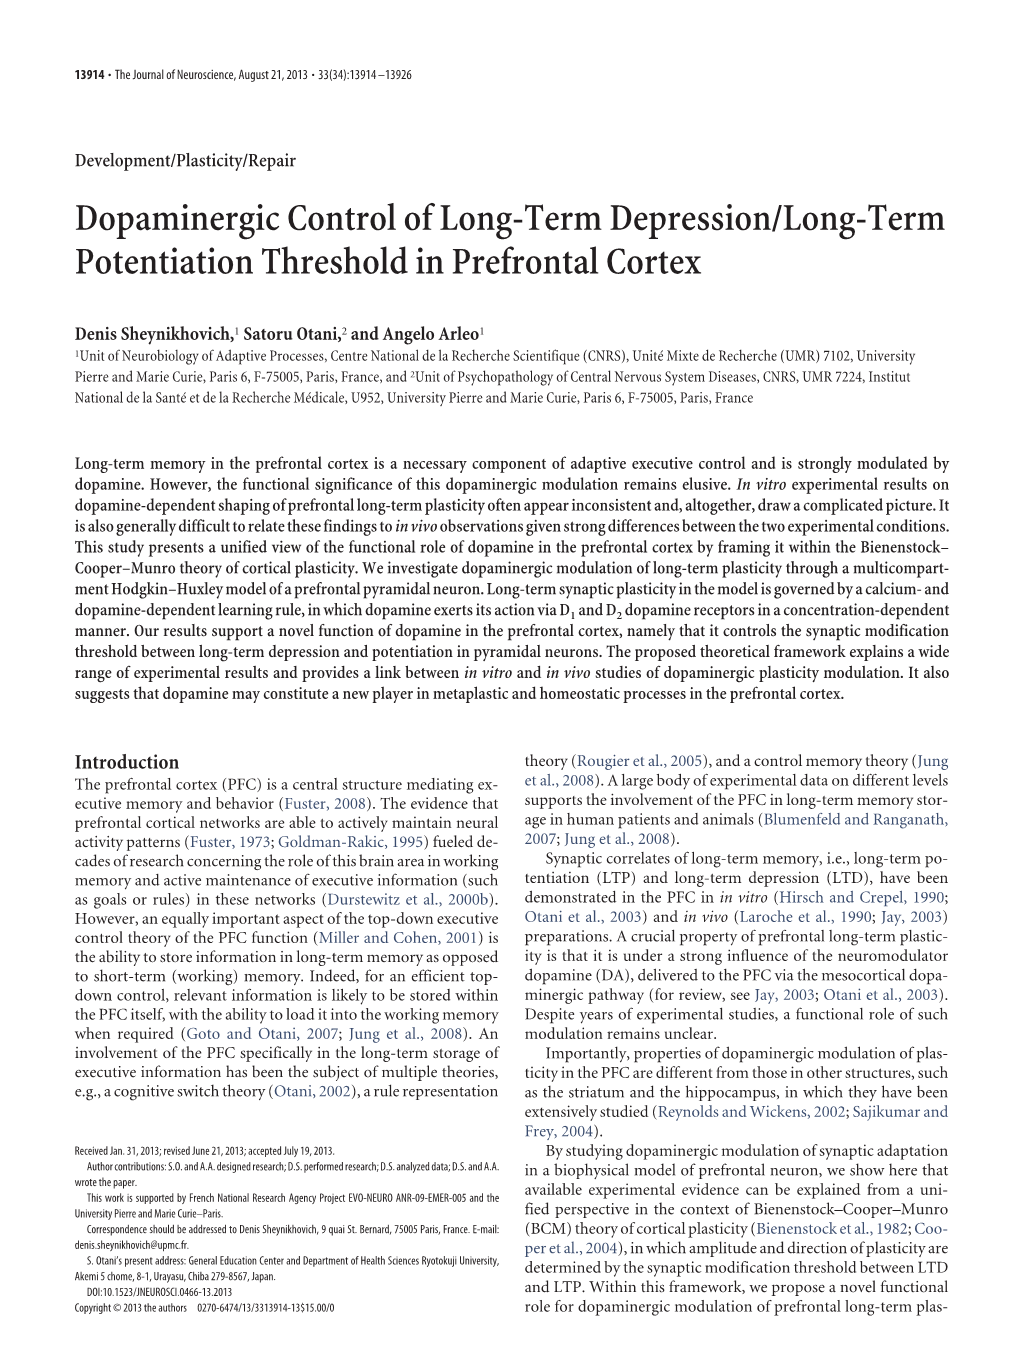 Dopaminergic Control of Long-Term Depression/Long-Term Potentiation Threshold in Prefrontal Cortex